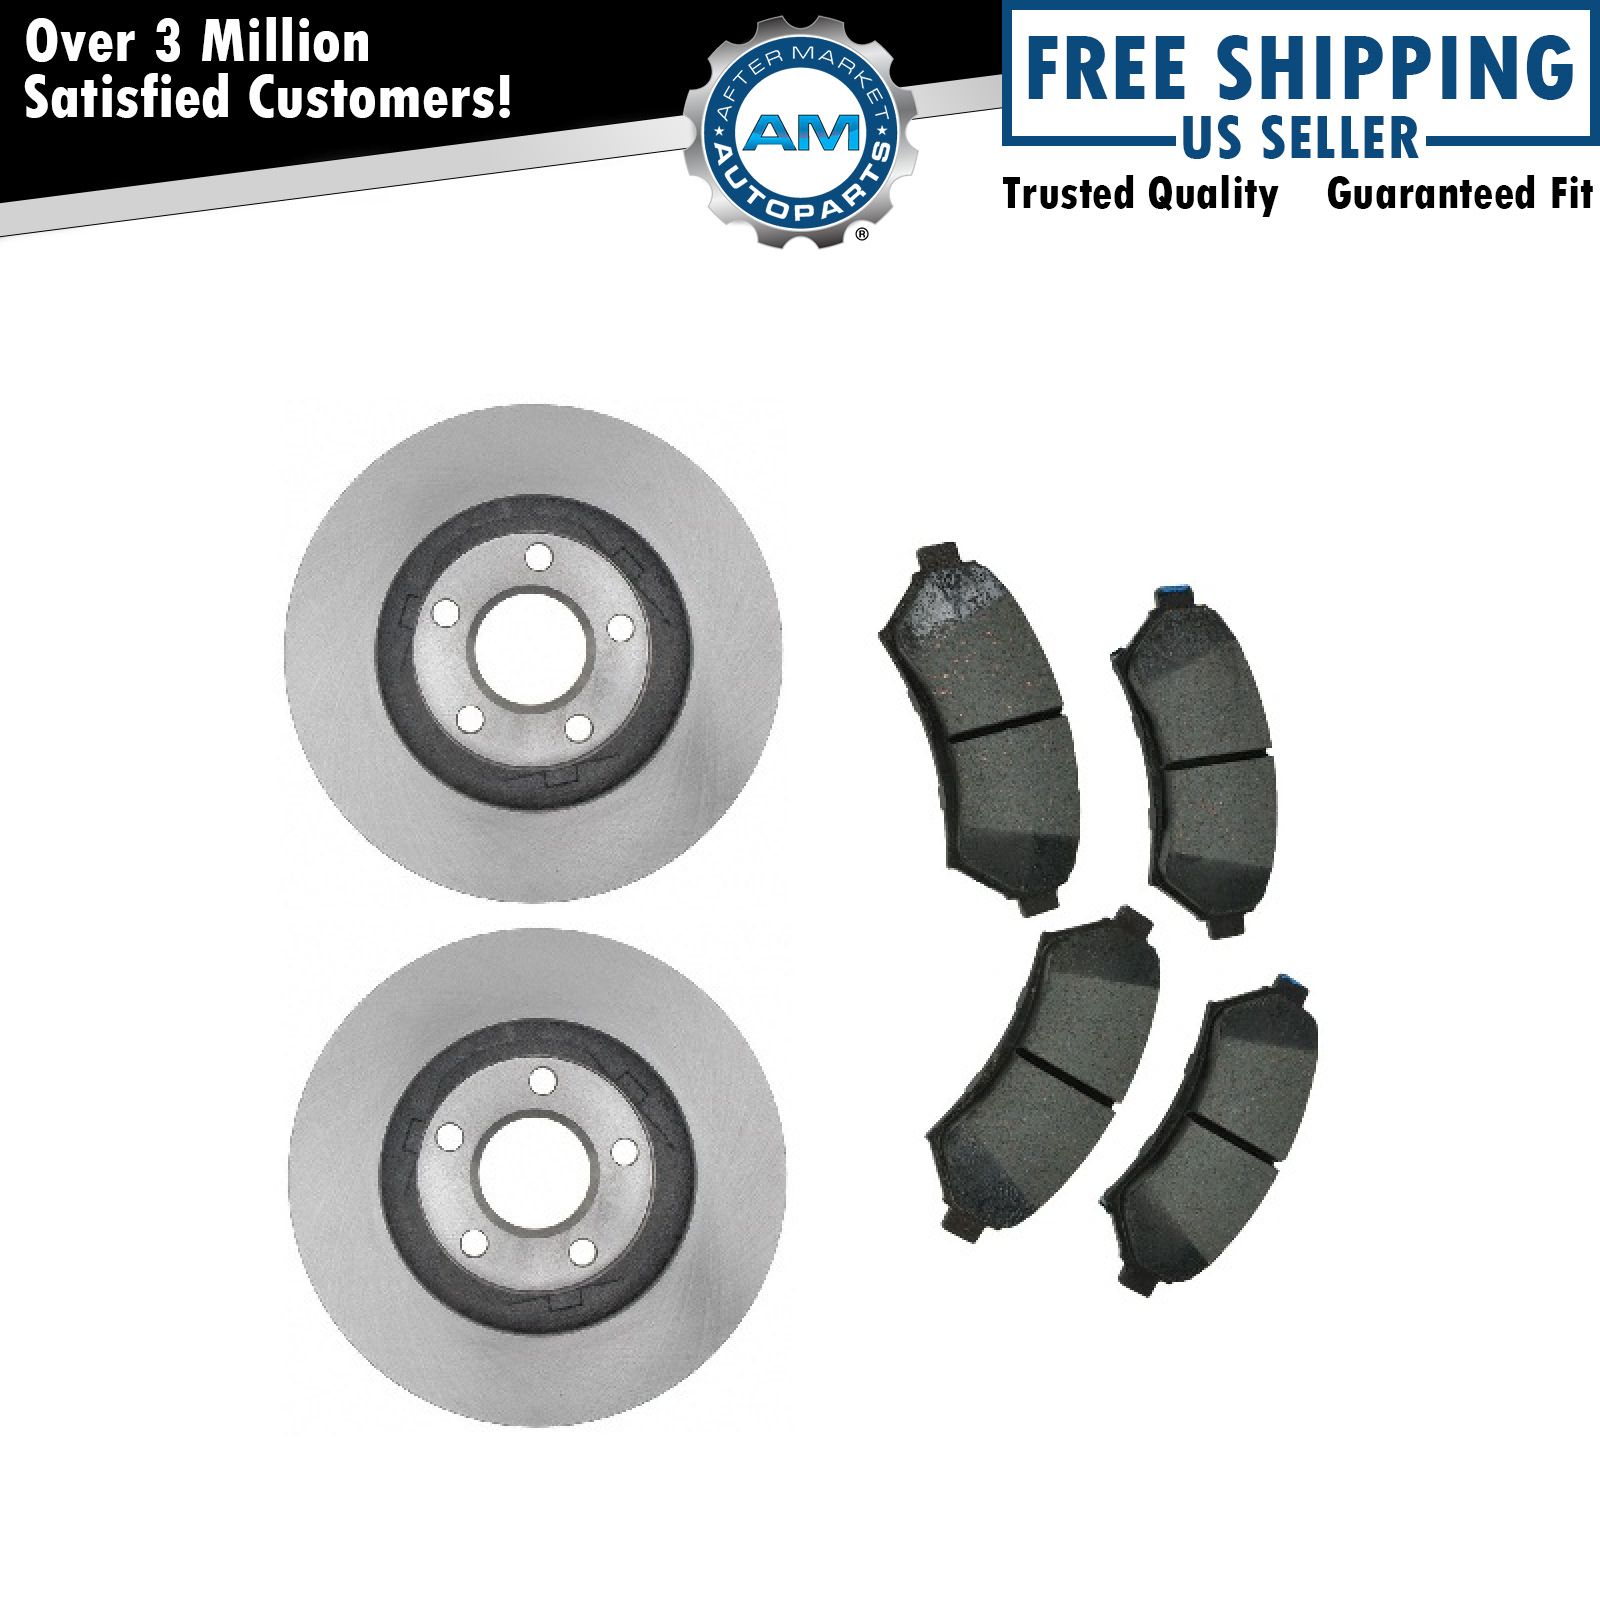 RAYBESTOS Front Brake Pad & Rotor Kit Set for Chevy Buick Pontiac Oldsmobile